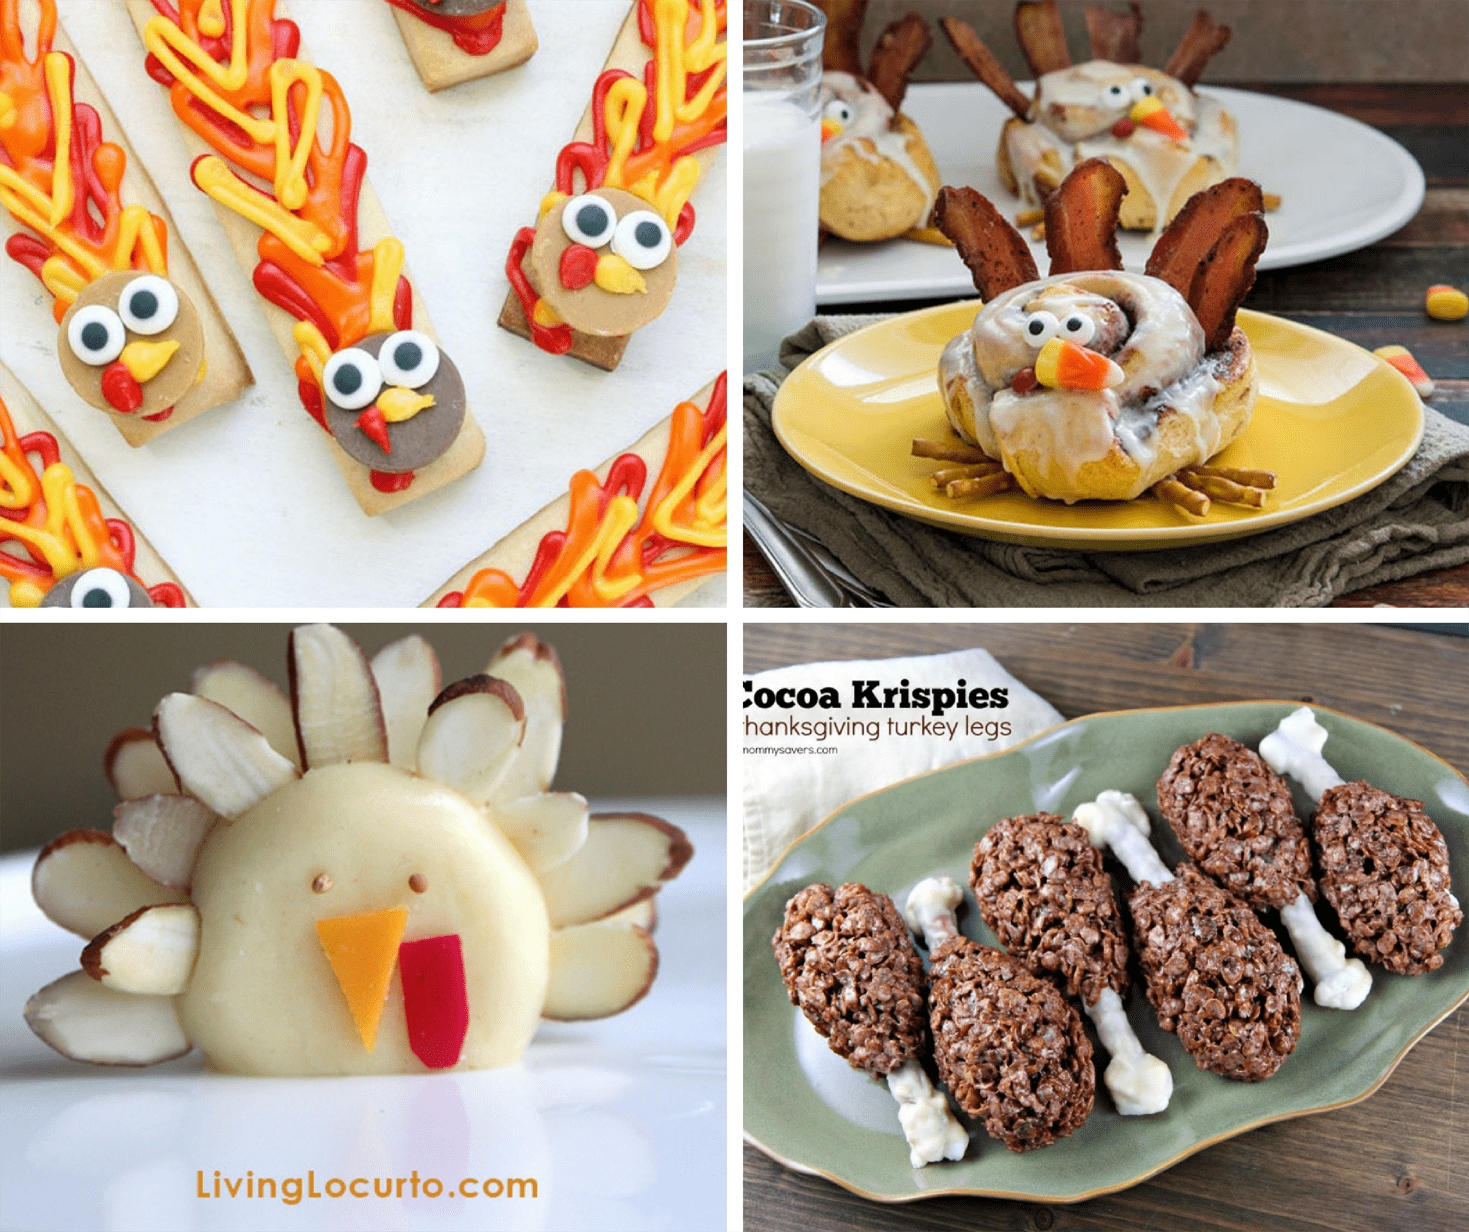 10 Fantastic Thanksgiving Food Ideas For Kids a roundup of 30 fun food ideas for thanksgiving thanksgiving food 1 2022